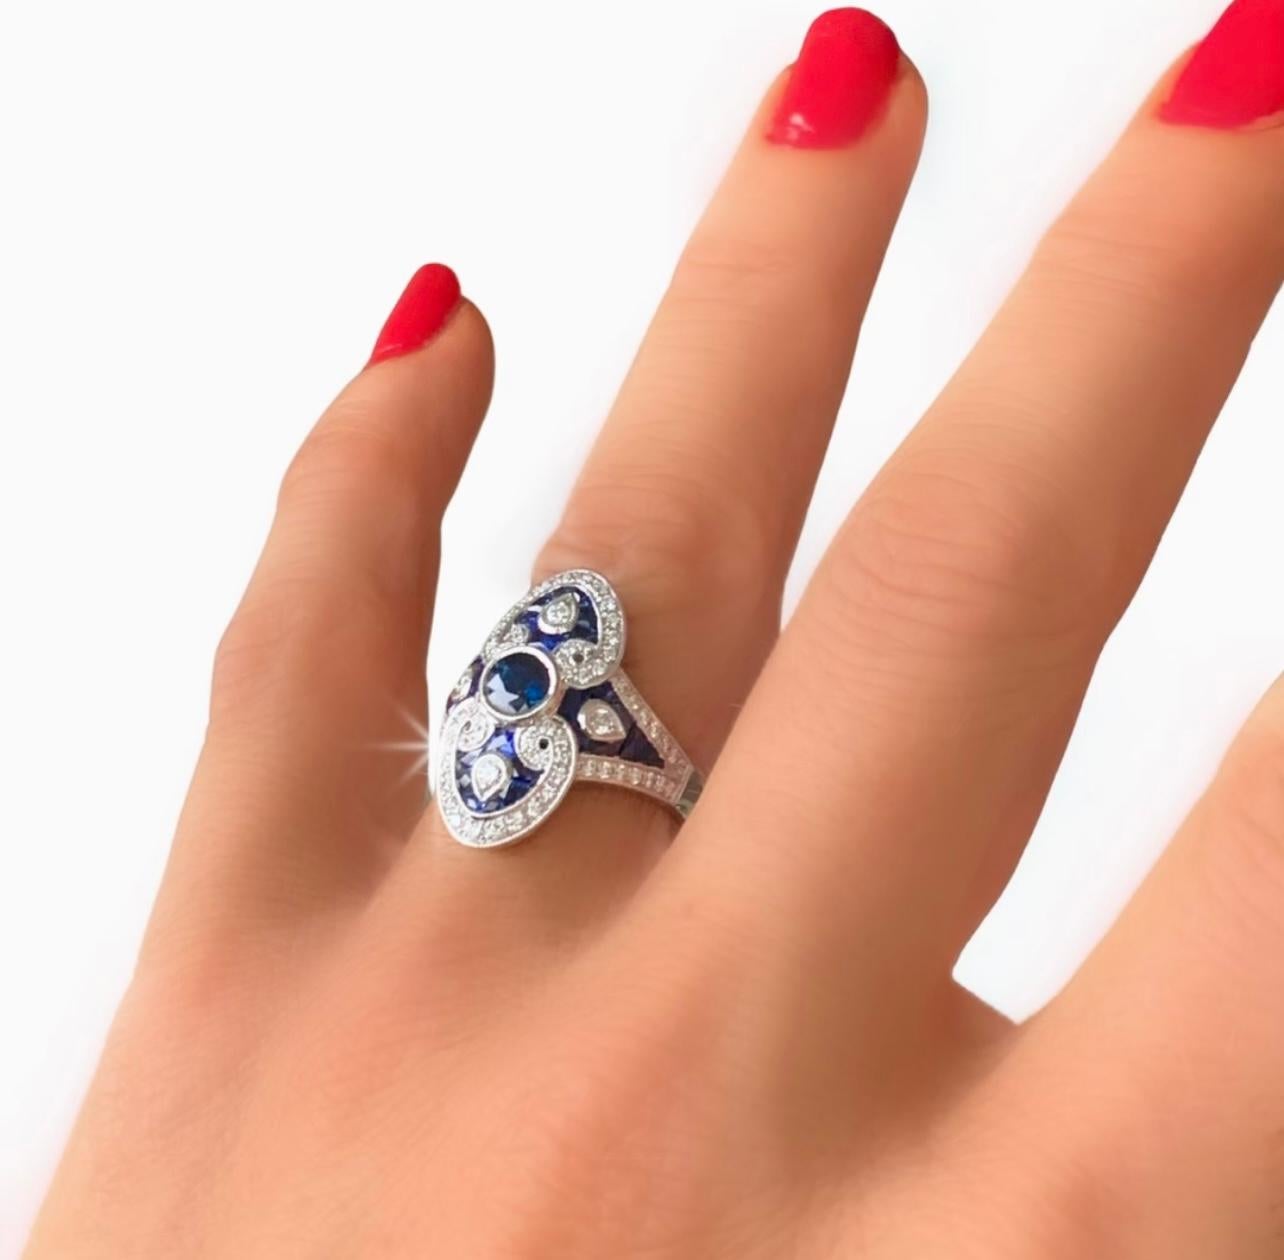 Round Cut Beverley K Vintage Inspired Sapphire and Diamond Ring